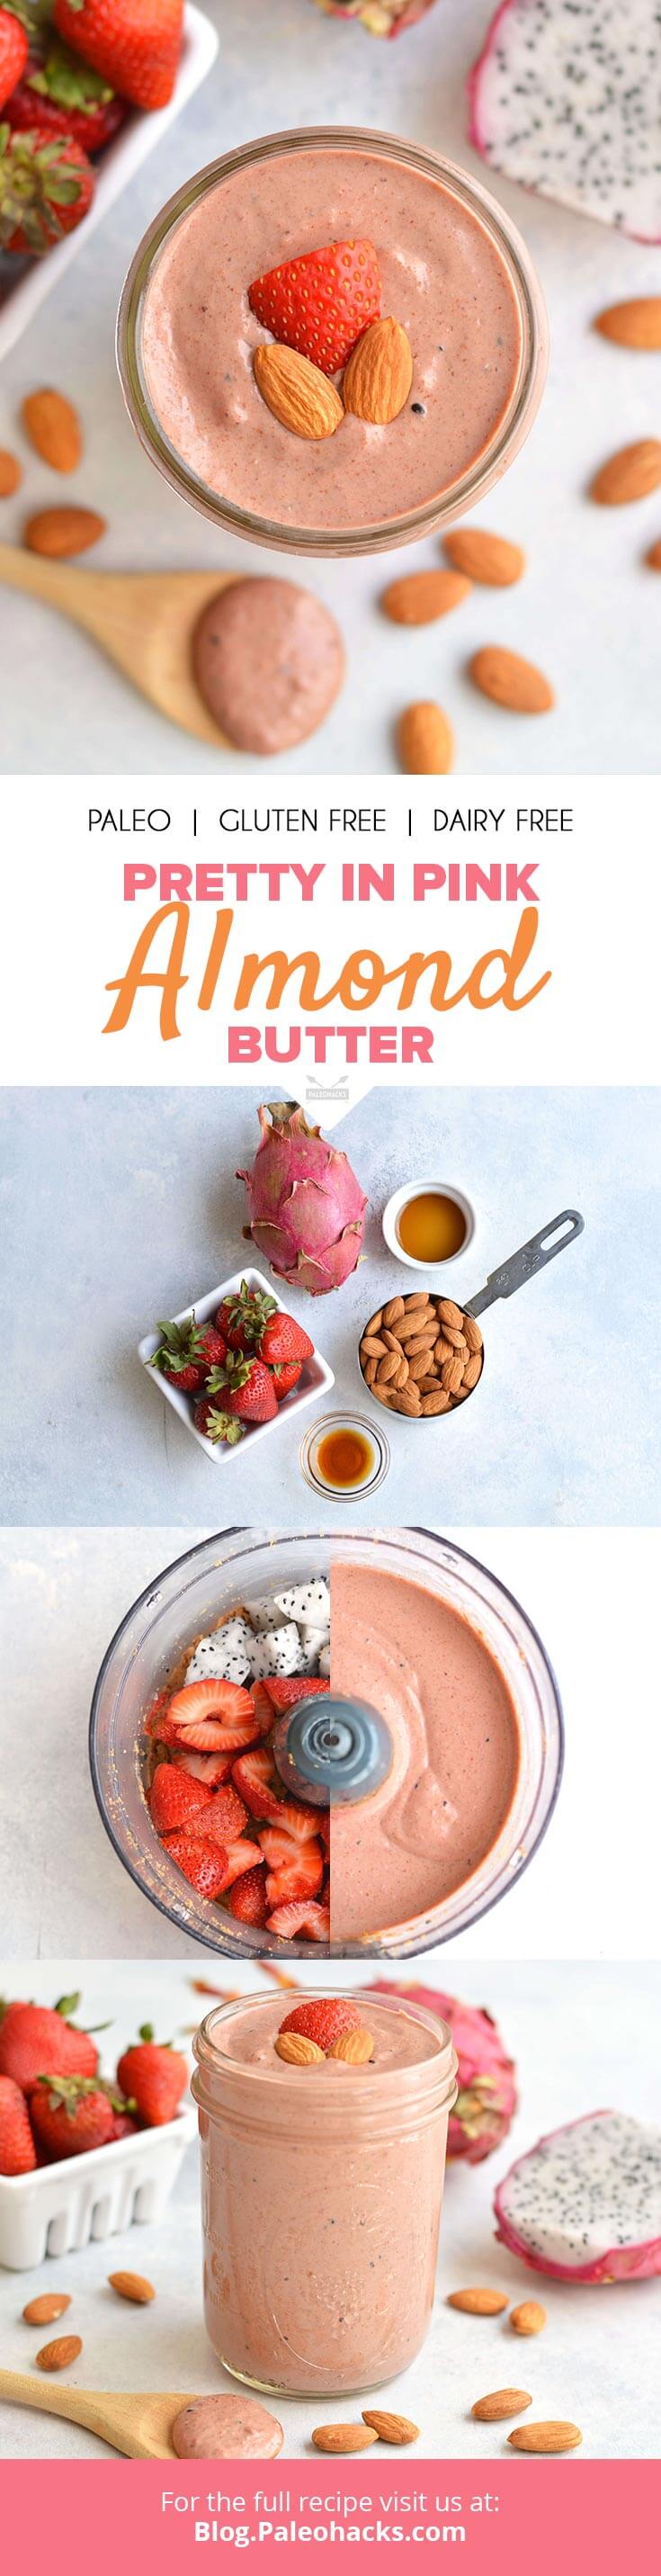 Grab your spoon and dive into this fruity, creamy pink almond butter with fresh strawberries and dragon fruit. Enjoy with Paleo toast or in a smoothie bowl!